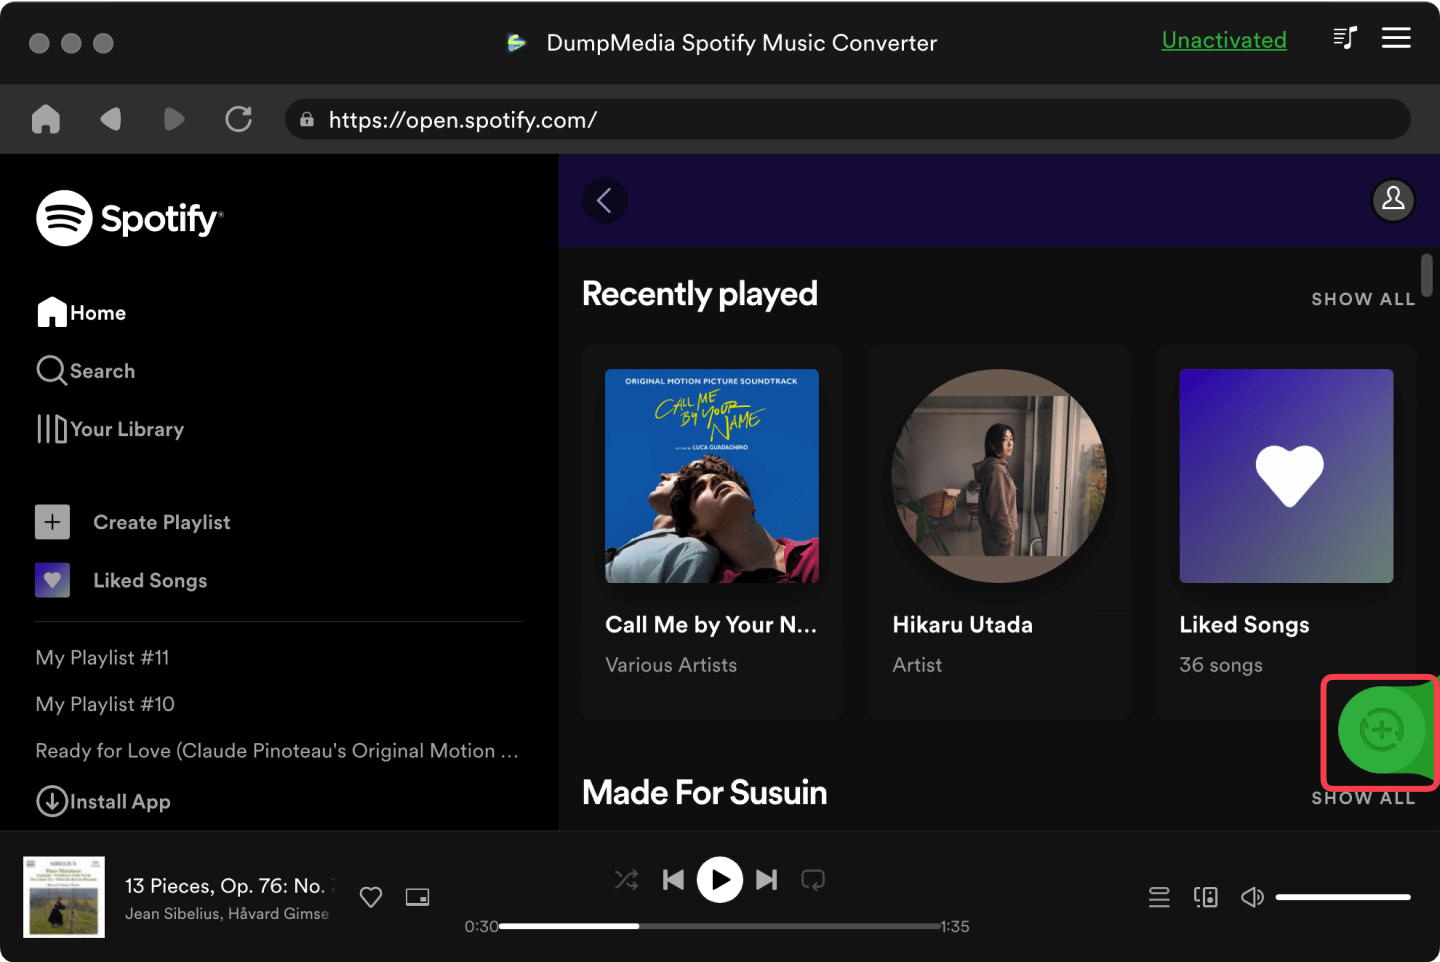 Adding Spotify Songs to Third Party Converter